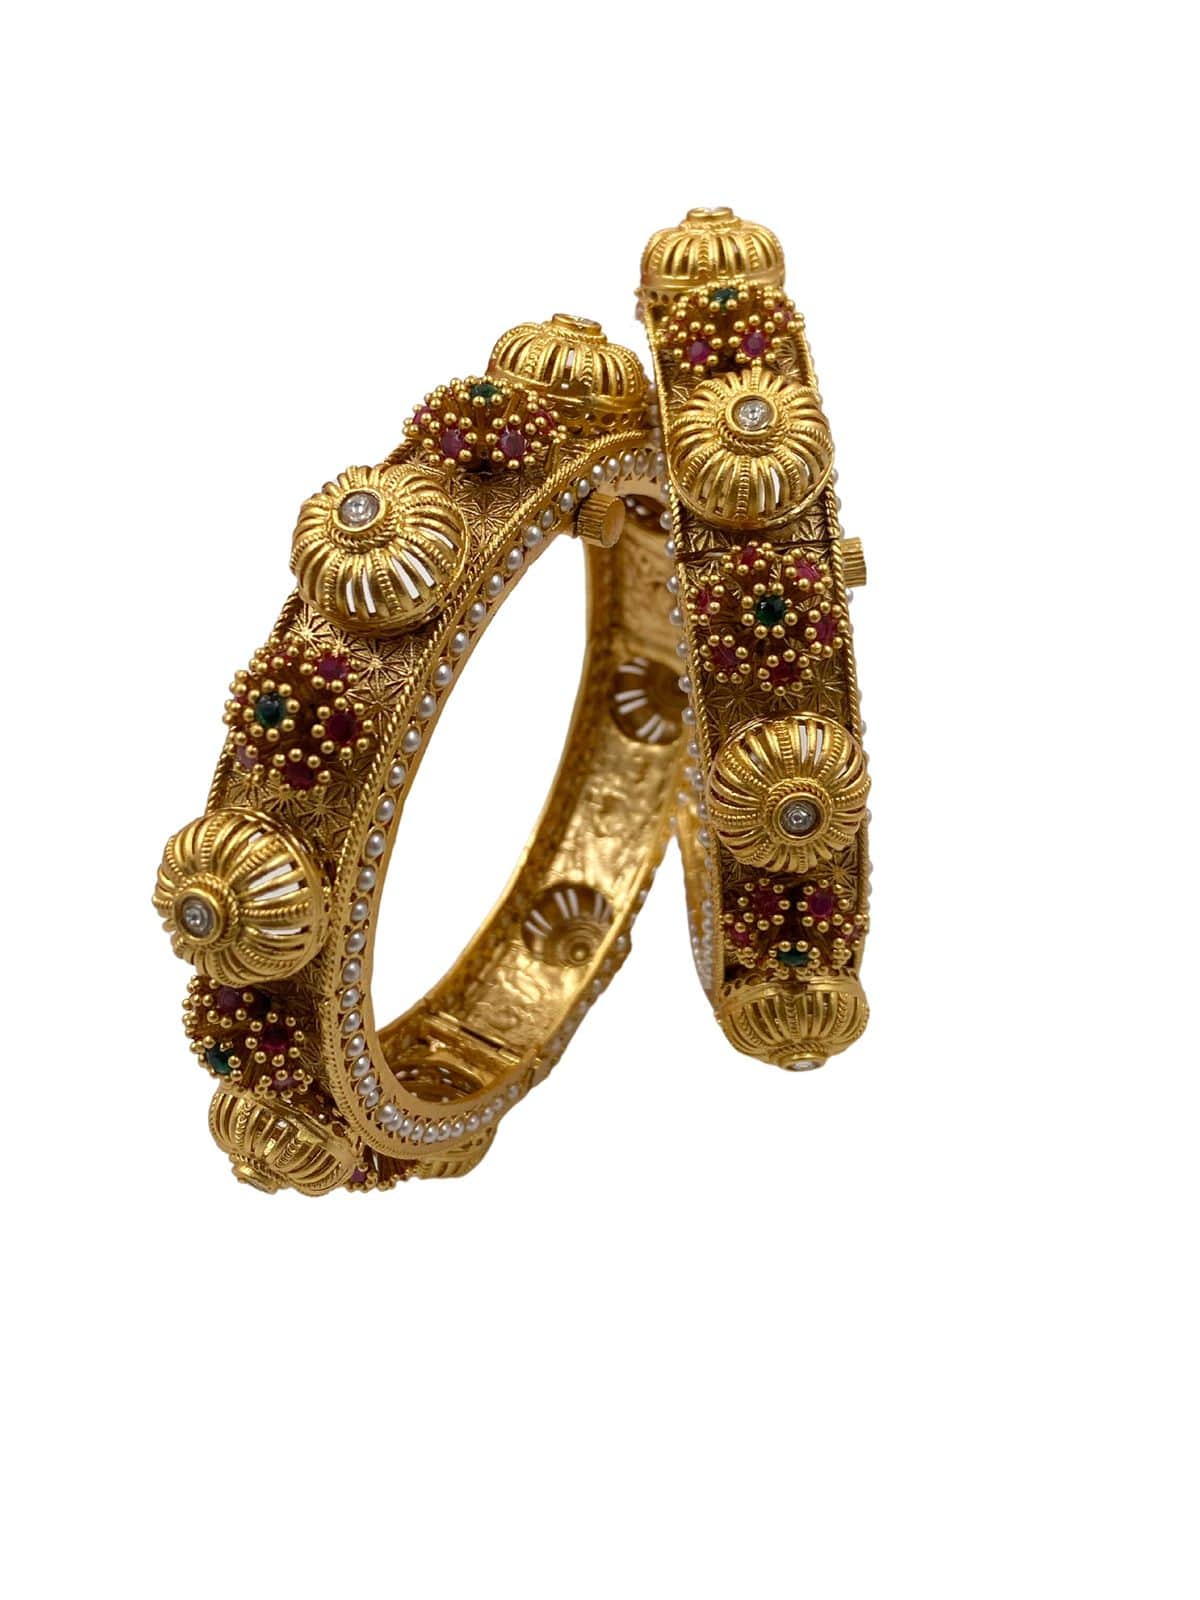 Traditional Gold Plated Pacheli Gokhru Bangle Set For Weddings By Gehna Shop Antique Golden Bangles